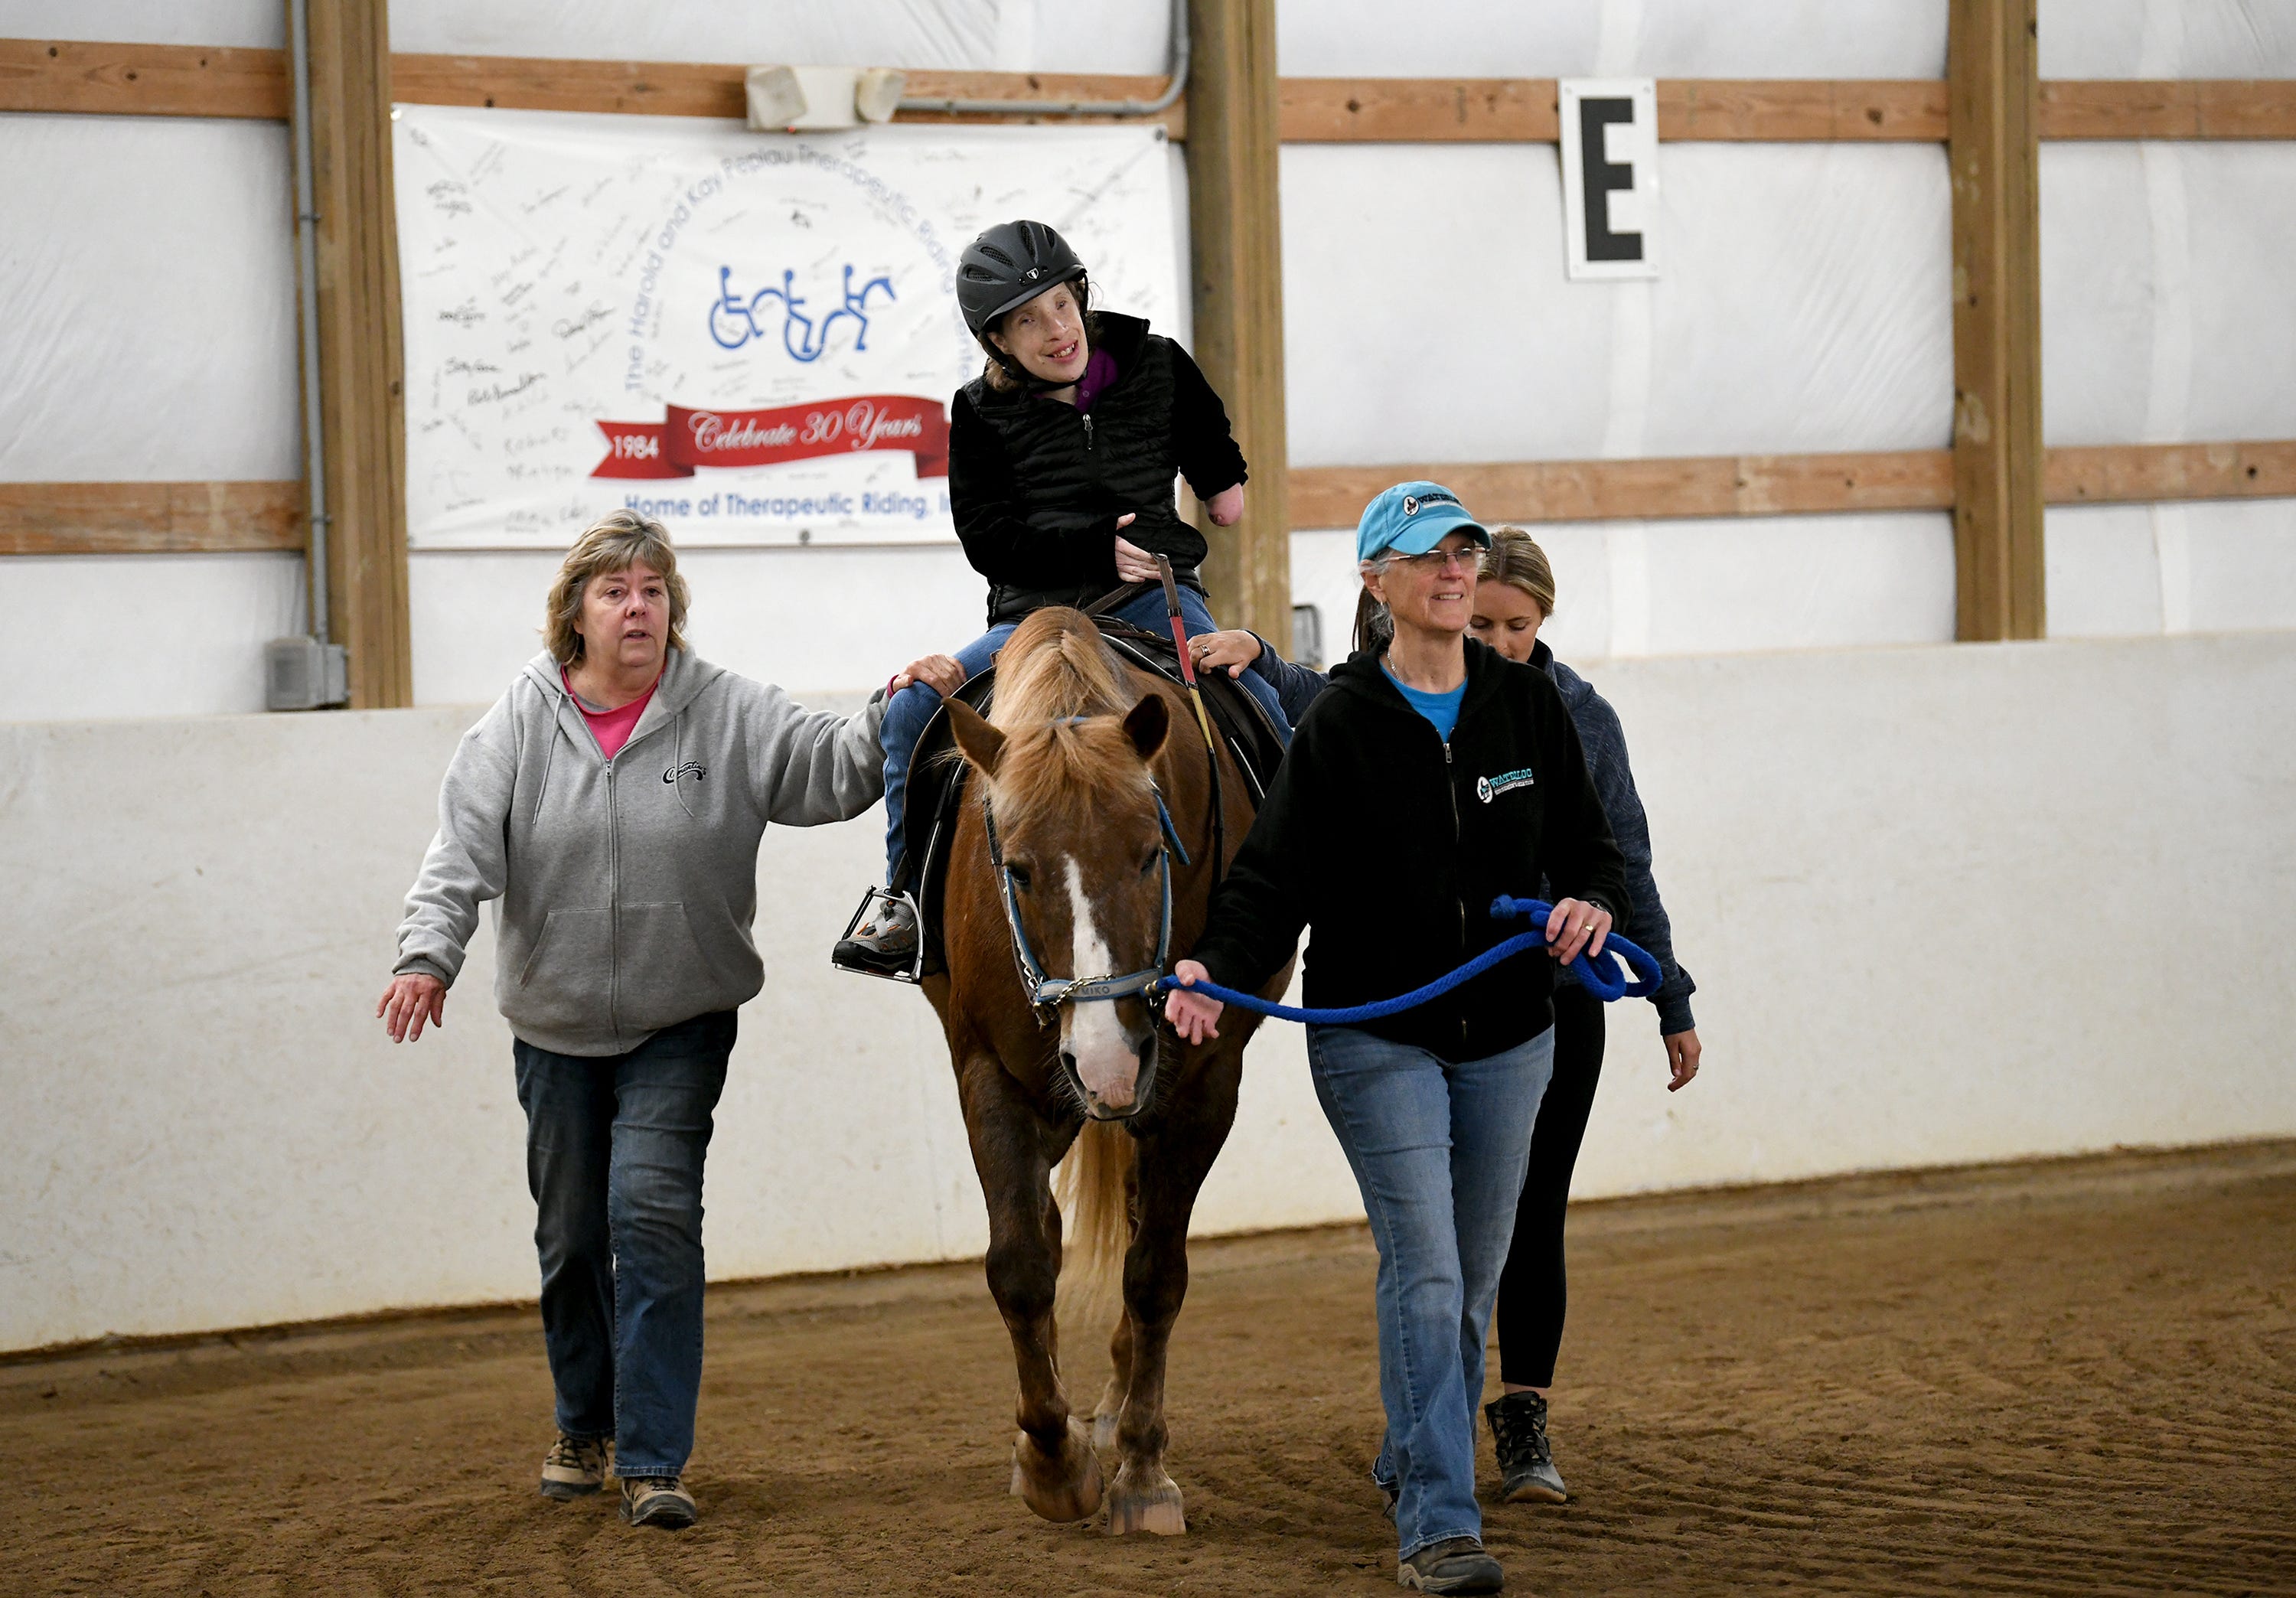 Elizabeth Lerchin rides the horse Miko, with the help of volunteers Louise Moore, left, Pat Whitworth, leading the horse, and Ellie Clark.